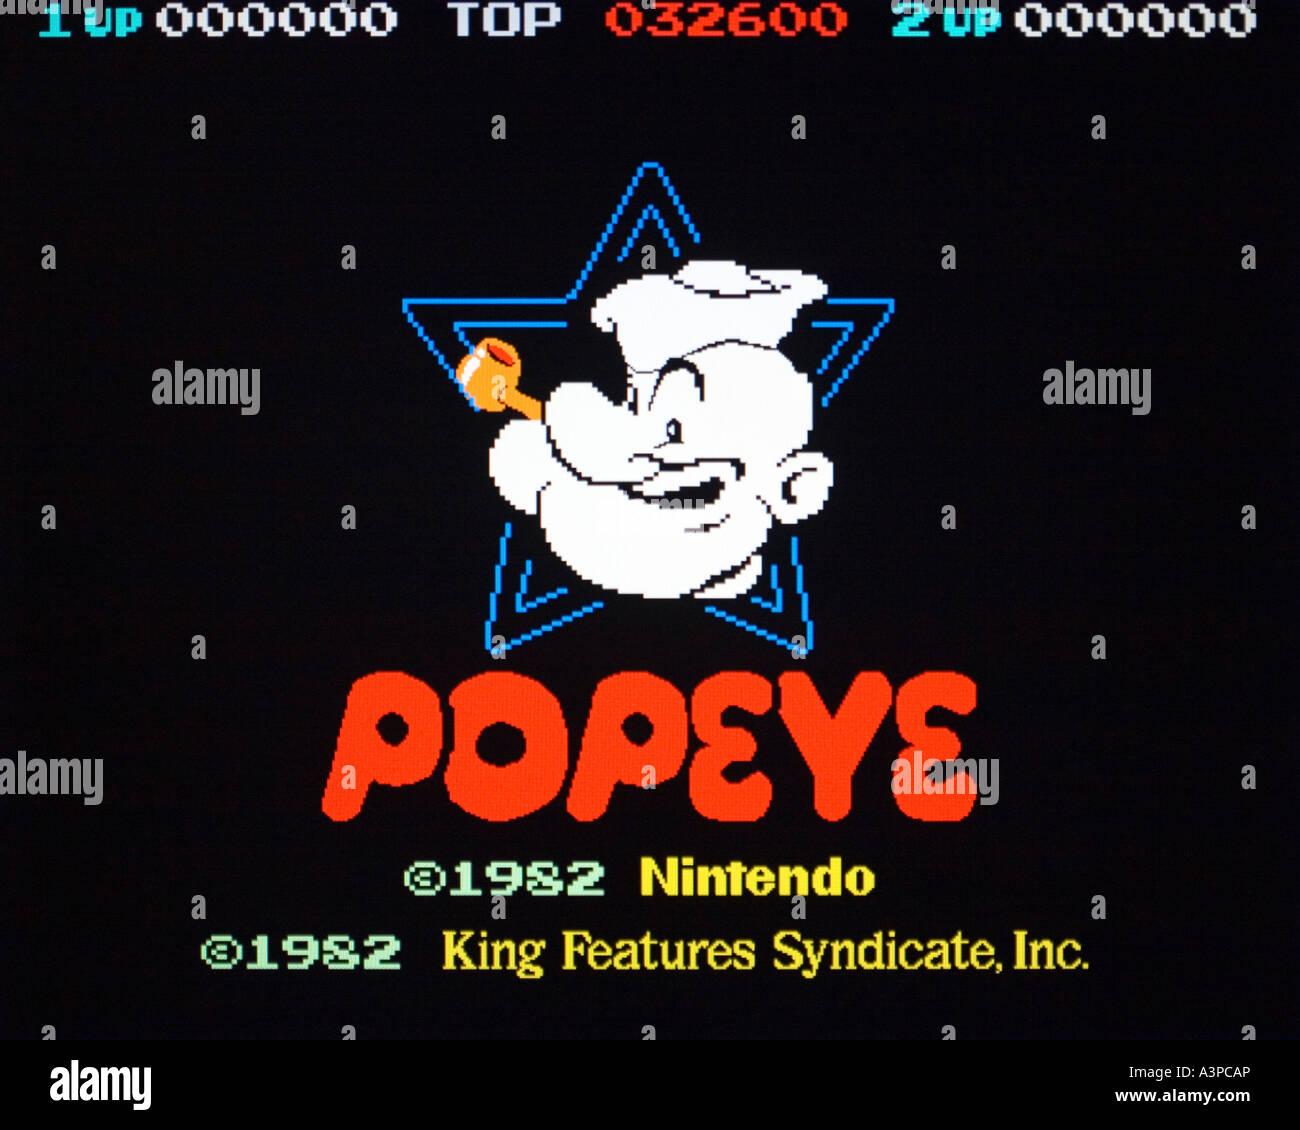 Popeye Nintendo King Features Syndicate Inc 1982 vintage arcade videogame screenshot EDITORIAL USE ONLY Stock Photo